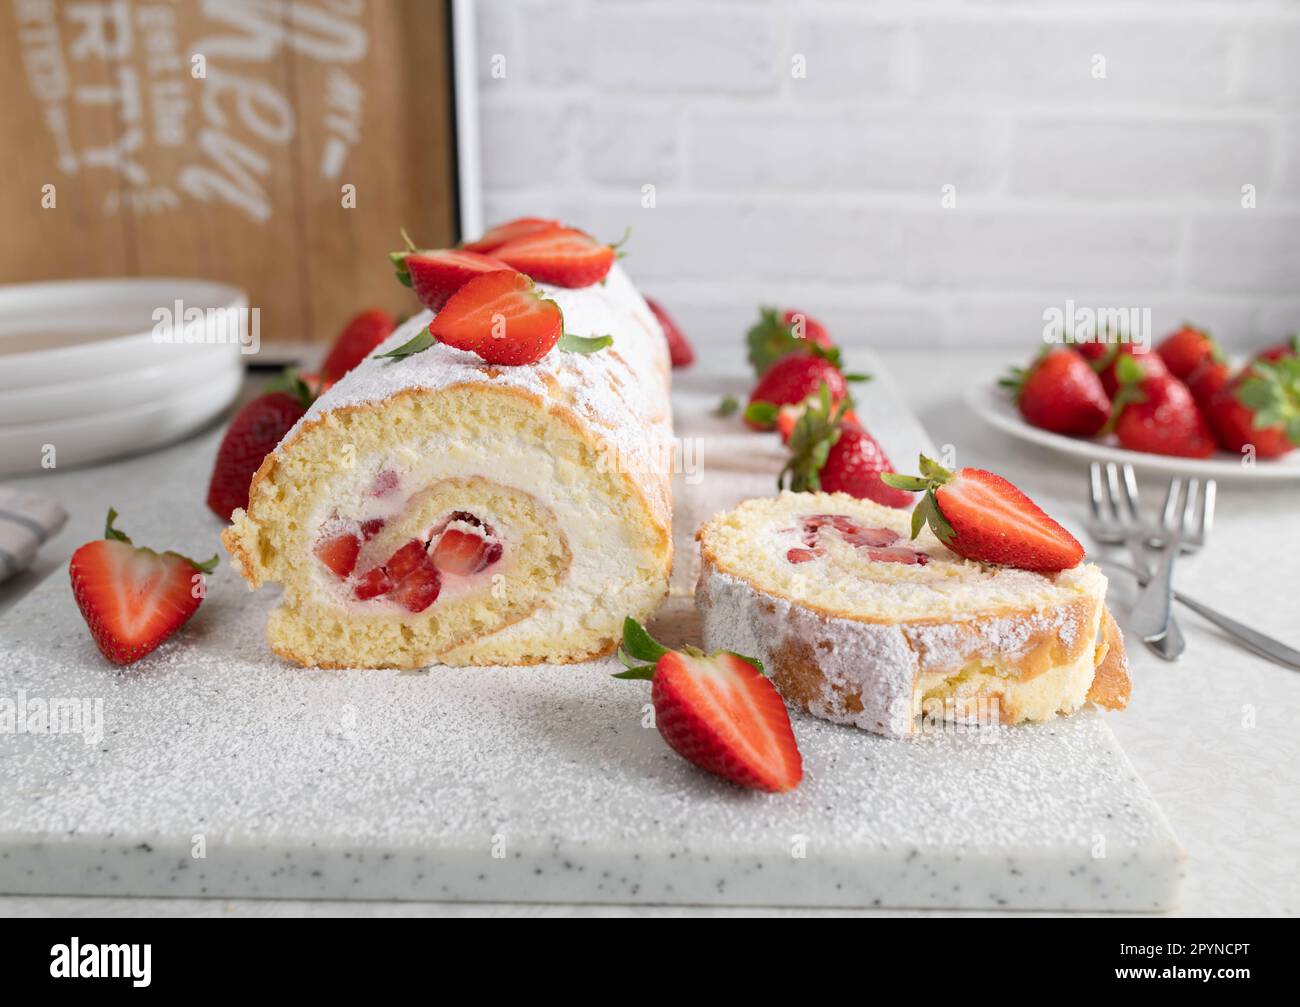 Swiss roll with whipped cream and strawberry filling on light kitchen background Stock Photo